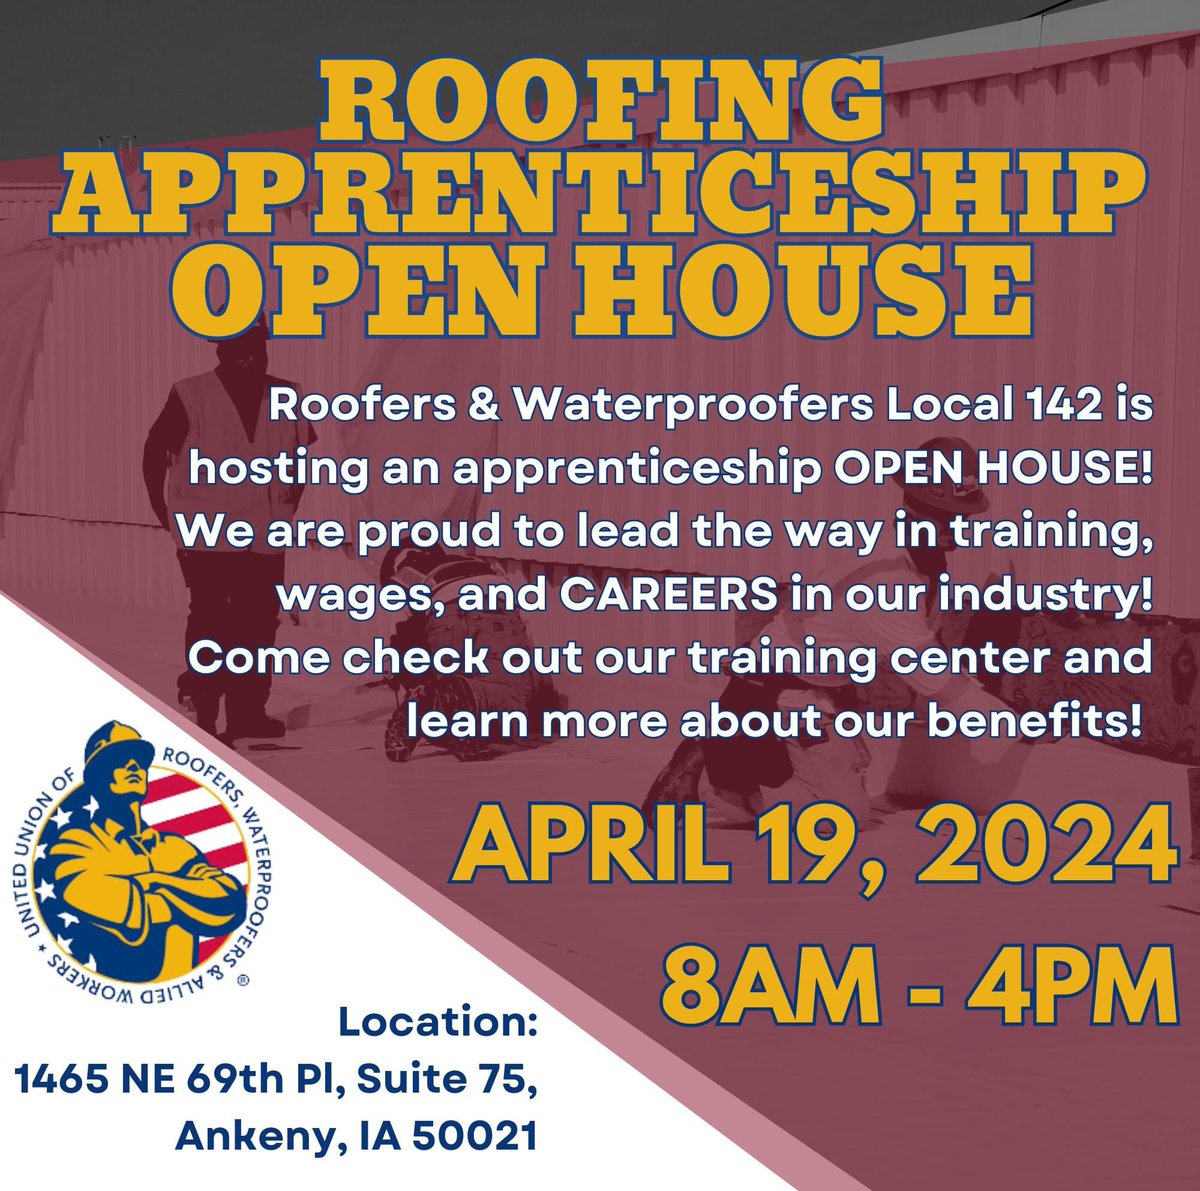 Awesome opportunity TODAY to learn more about @roofersunion Local 142 and their growing #apprenticeship!

#iowaskilledtrades #iowaconstruction #IowaWorkforce #iowajobs #iowaroofers